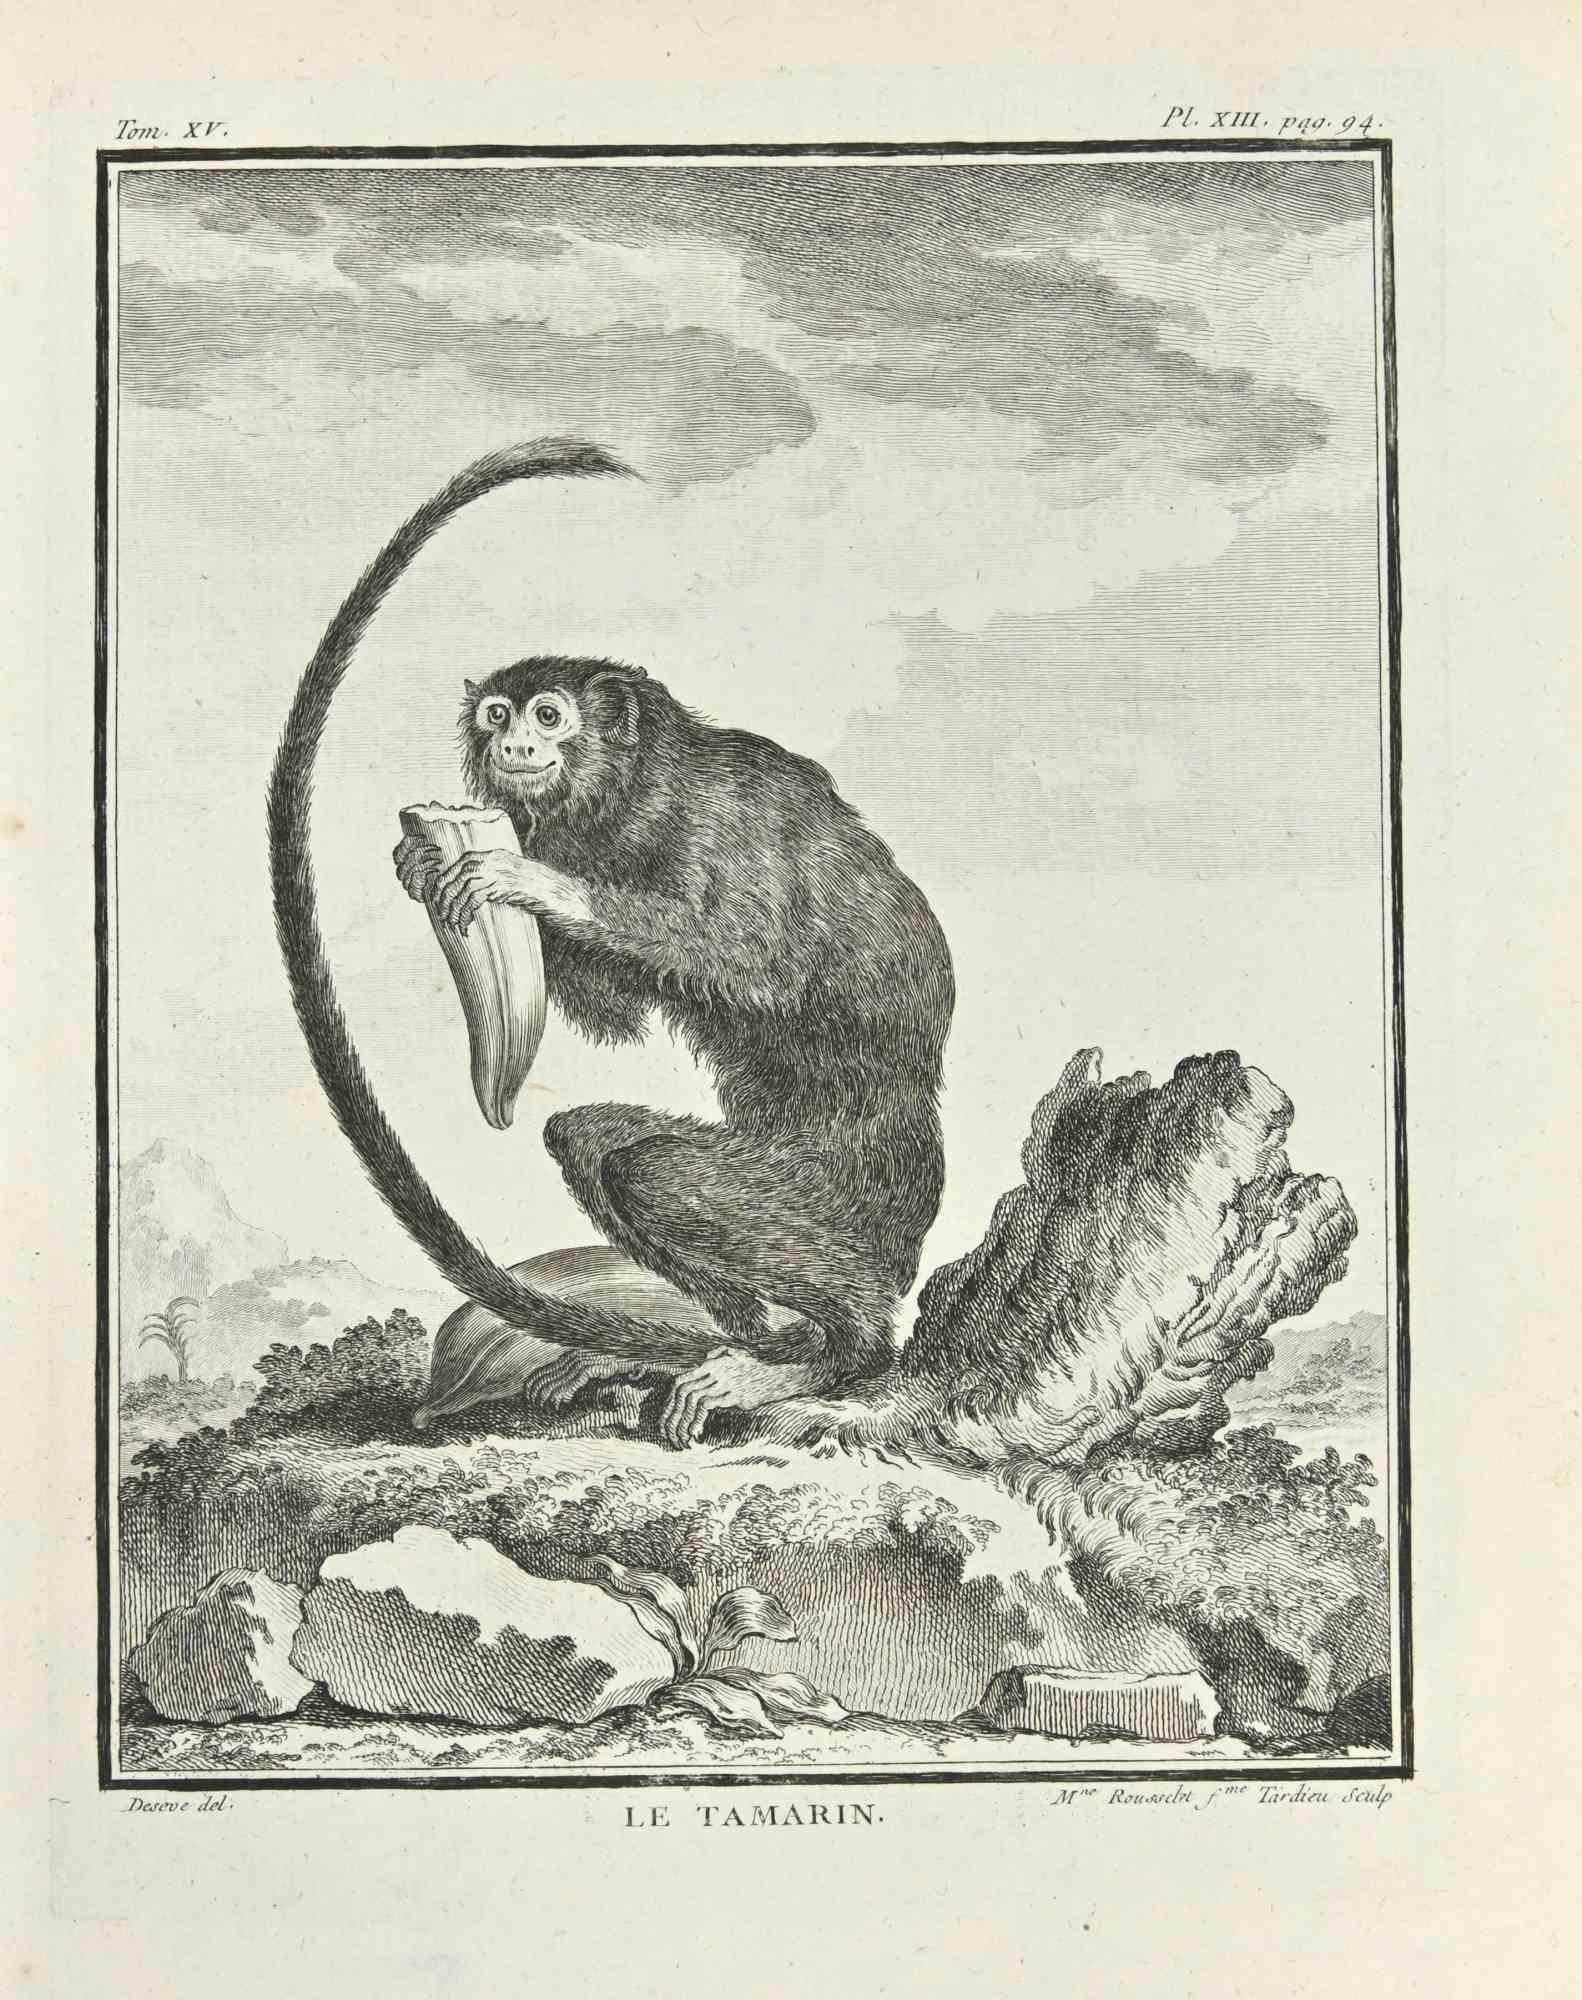 Le Tamarin is an etching realized by Juste Madeline Rousselet in 1771.

It belongs to the suite "Histoire Naturelle de Buffon".

The Artist's signature is engraved lower right.

Good conditions
 